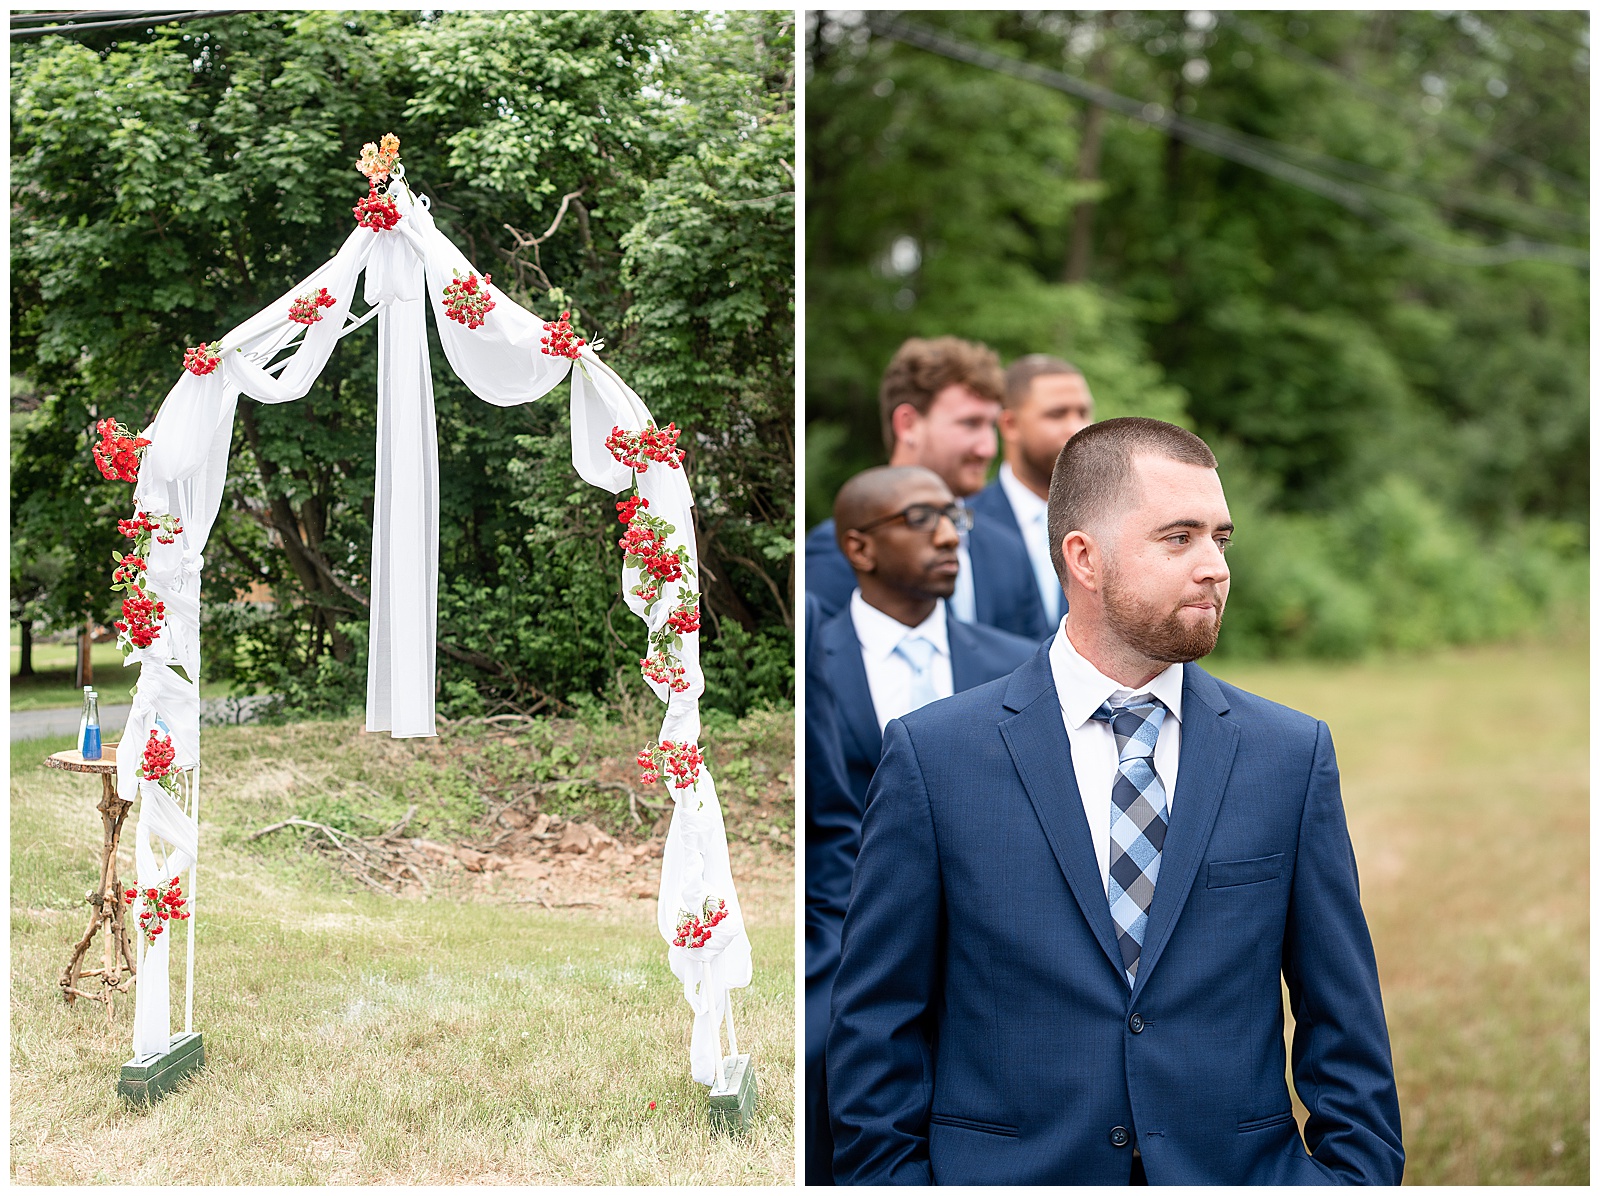 groom standing at front of aisle watching bride come towards him